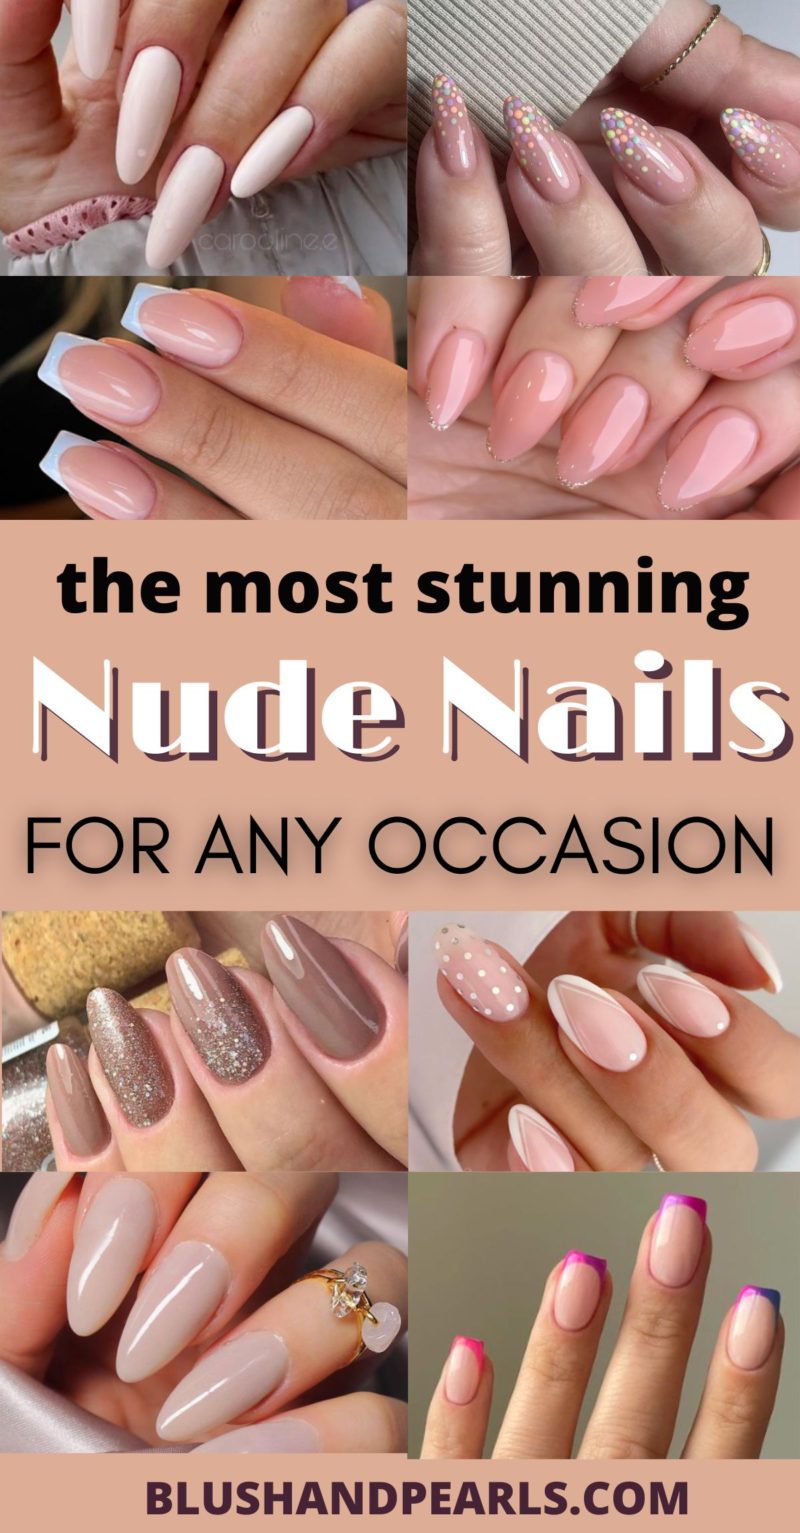 nude nails ideas. nude nails trends simple. nude nails classic. pink nude nail designs. french tipped nude nails wedding. nude nails acrylic coffin.